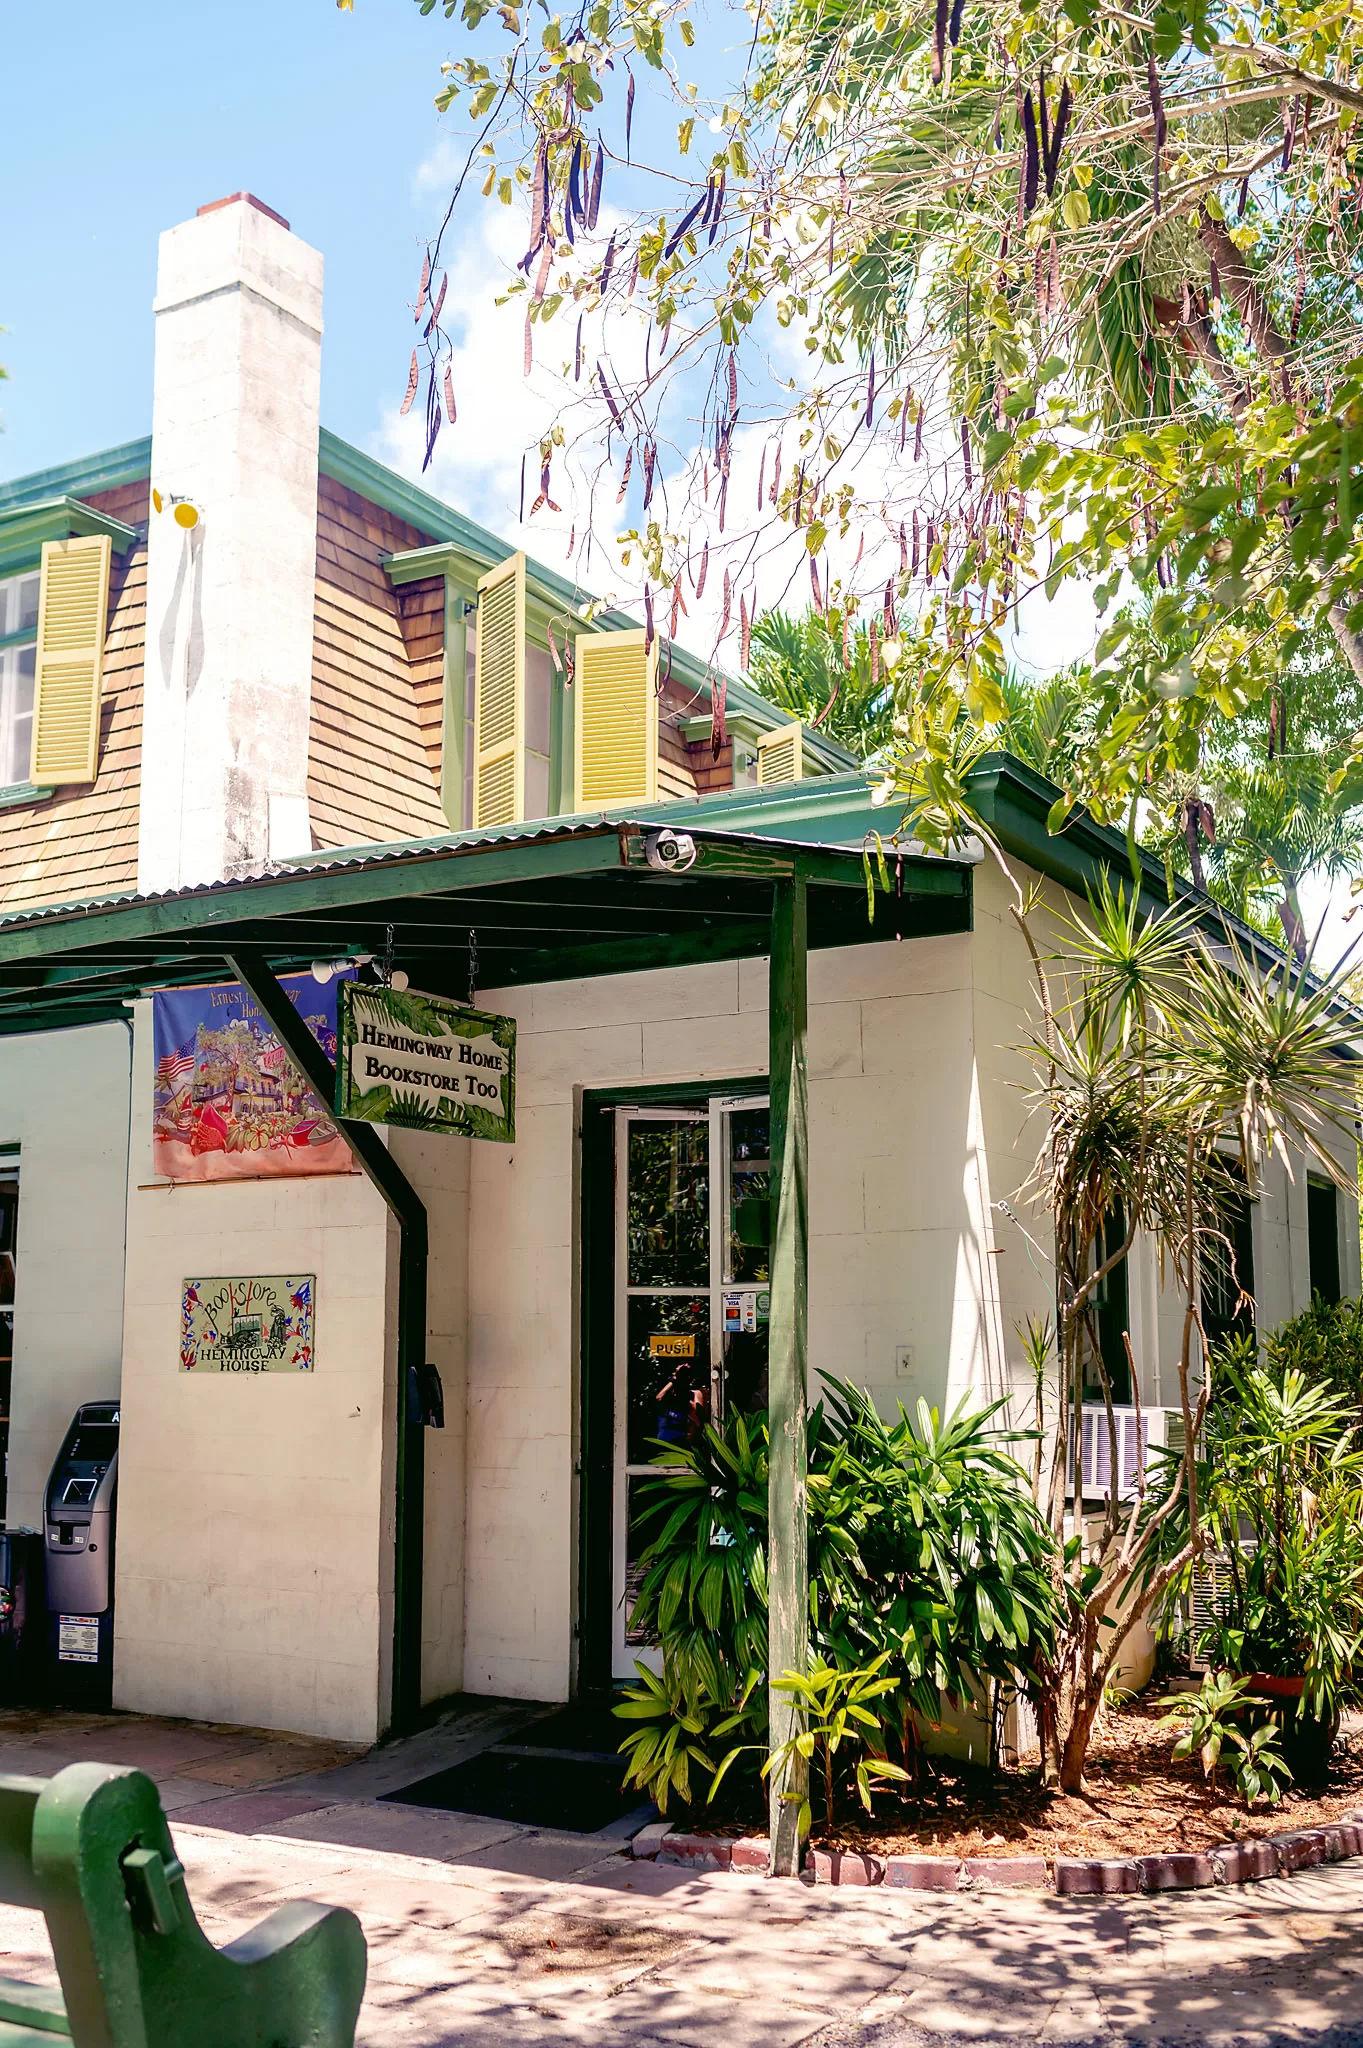 Photo of Key West Conch Train Stop at the Hemingway House Key West